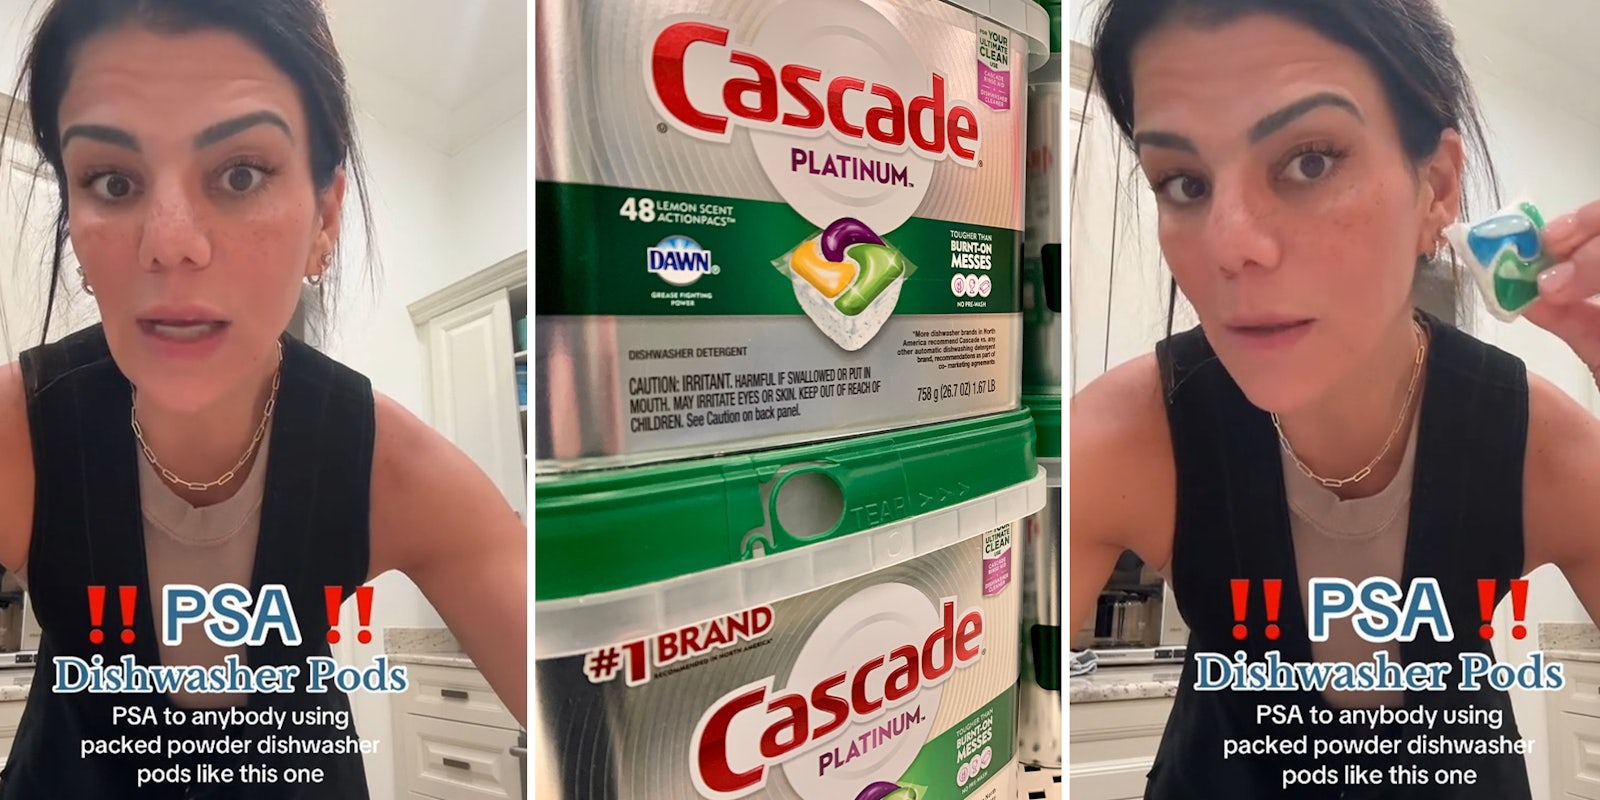 Woman issues warning on Cascade dishwasher pods after home kitchen incident